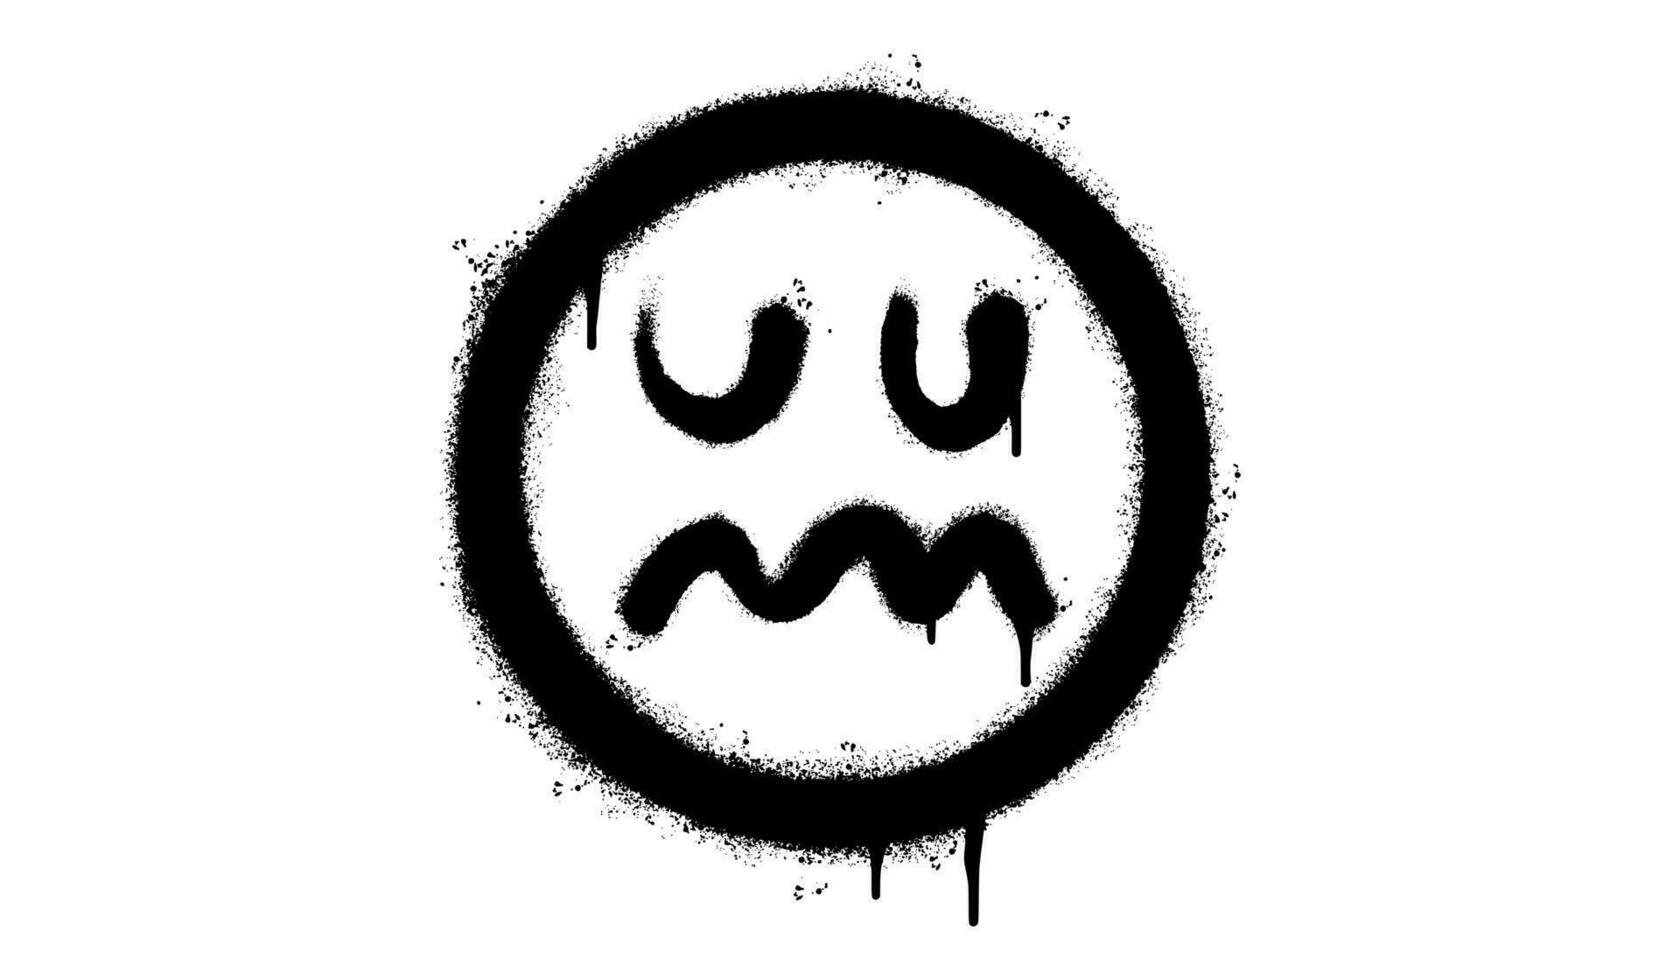 Spray Painted Graffiti scary sick face emoticon isolated on white background. vector